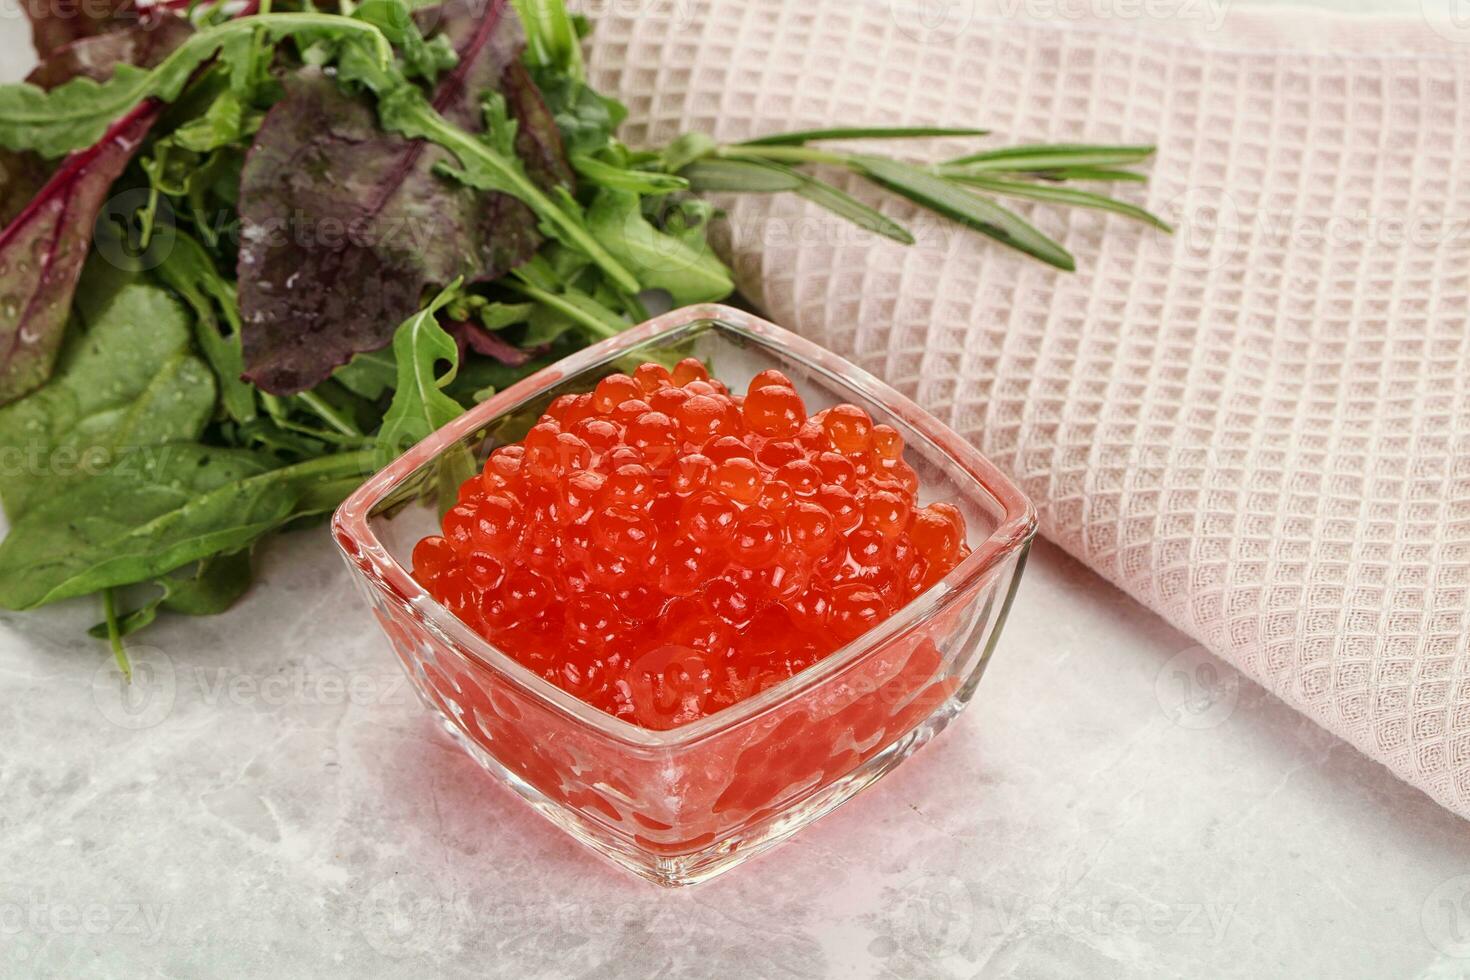 Red caviar in the bowl photo